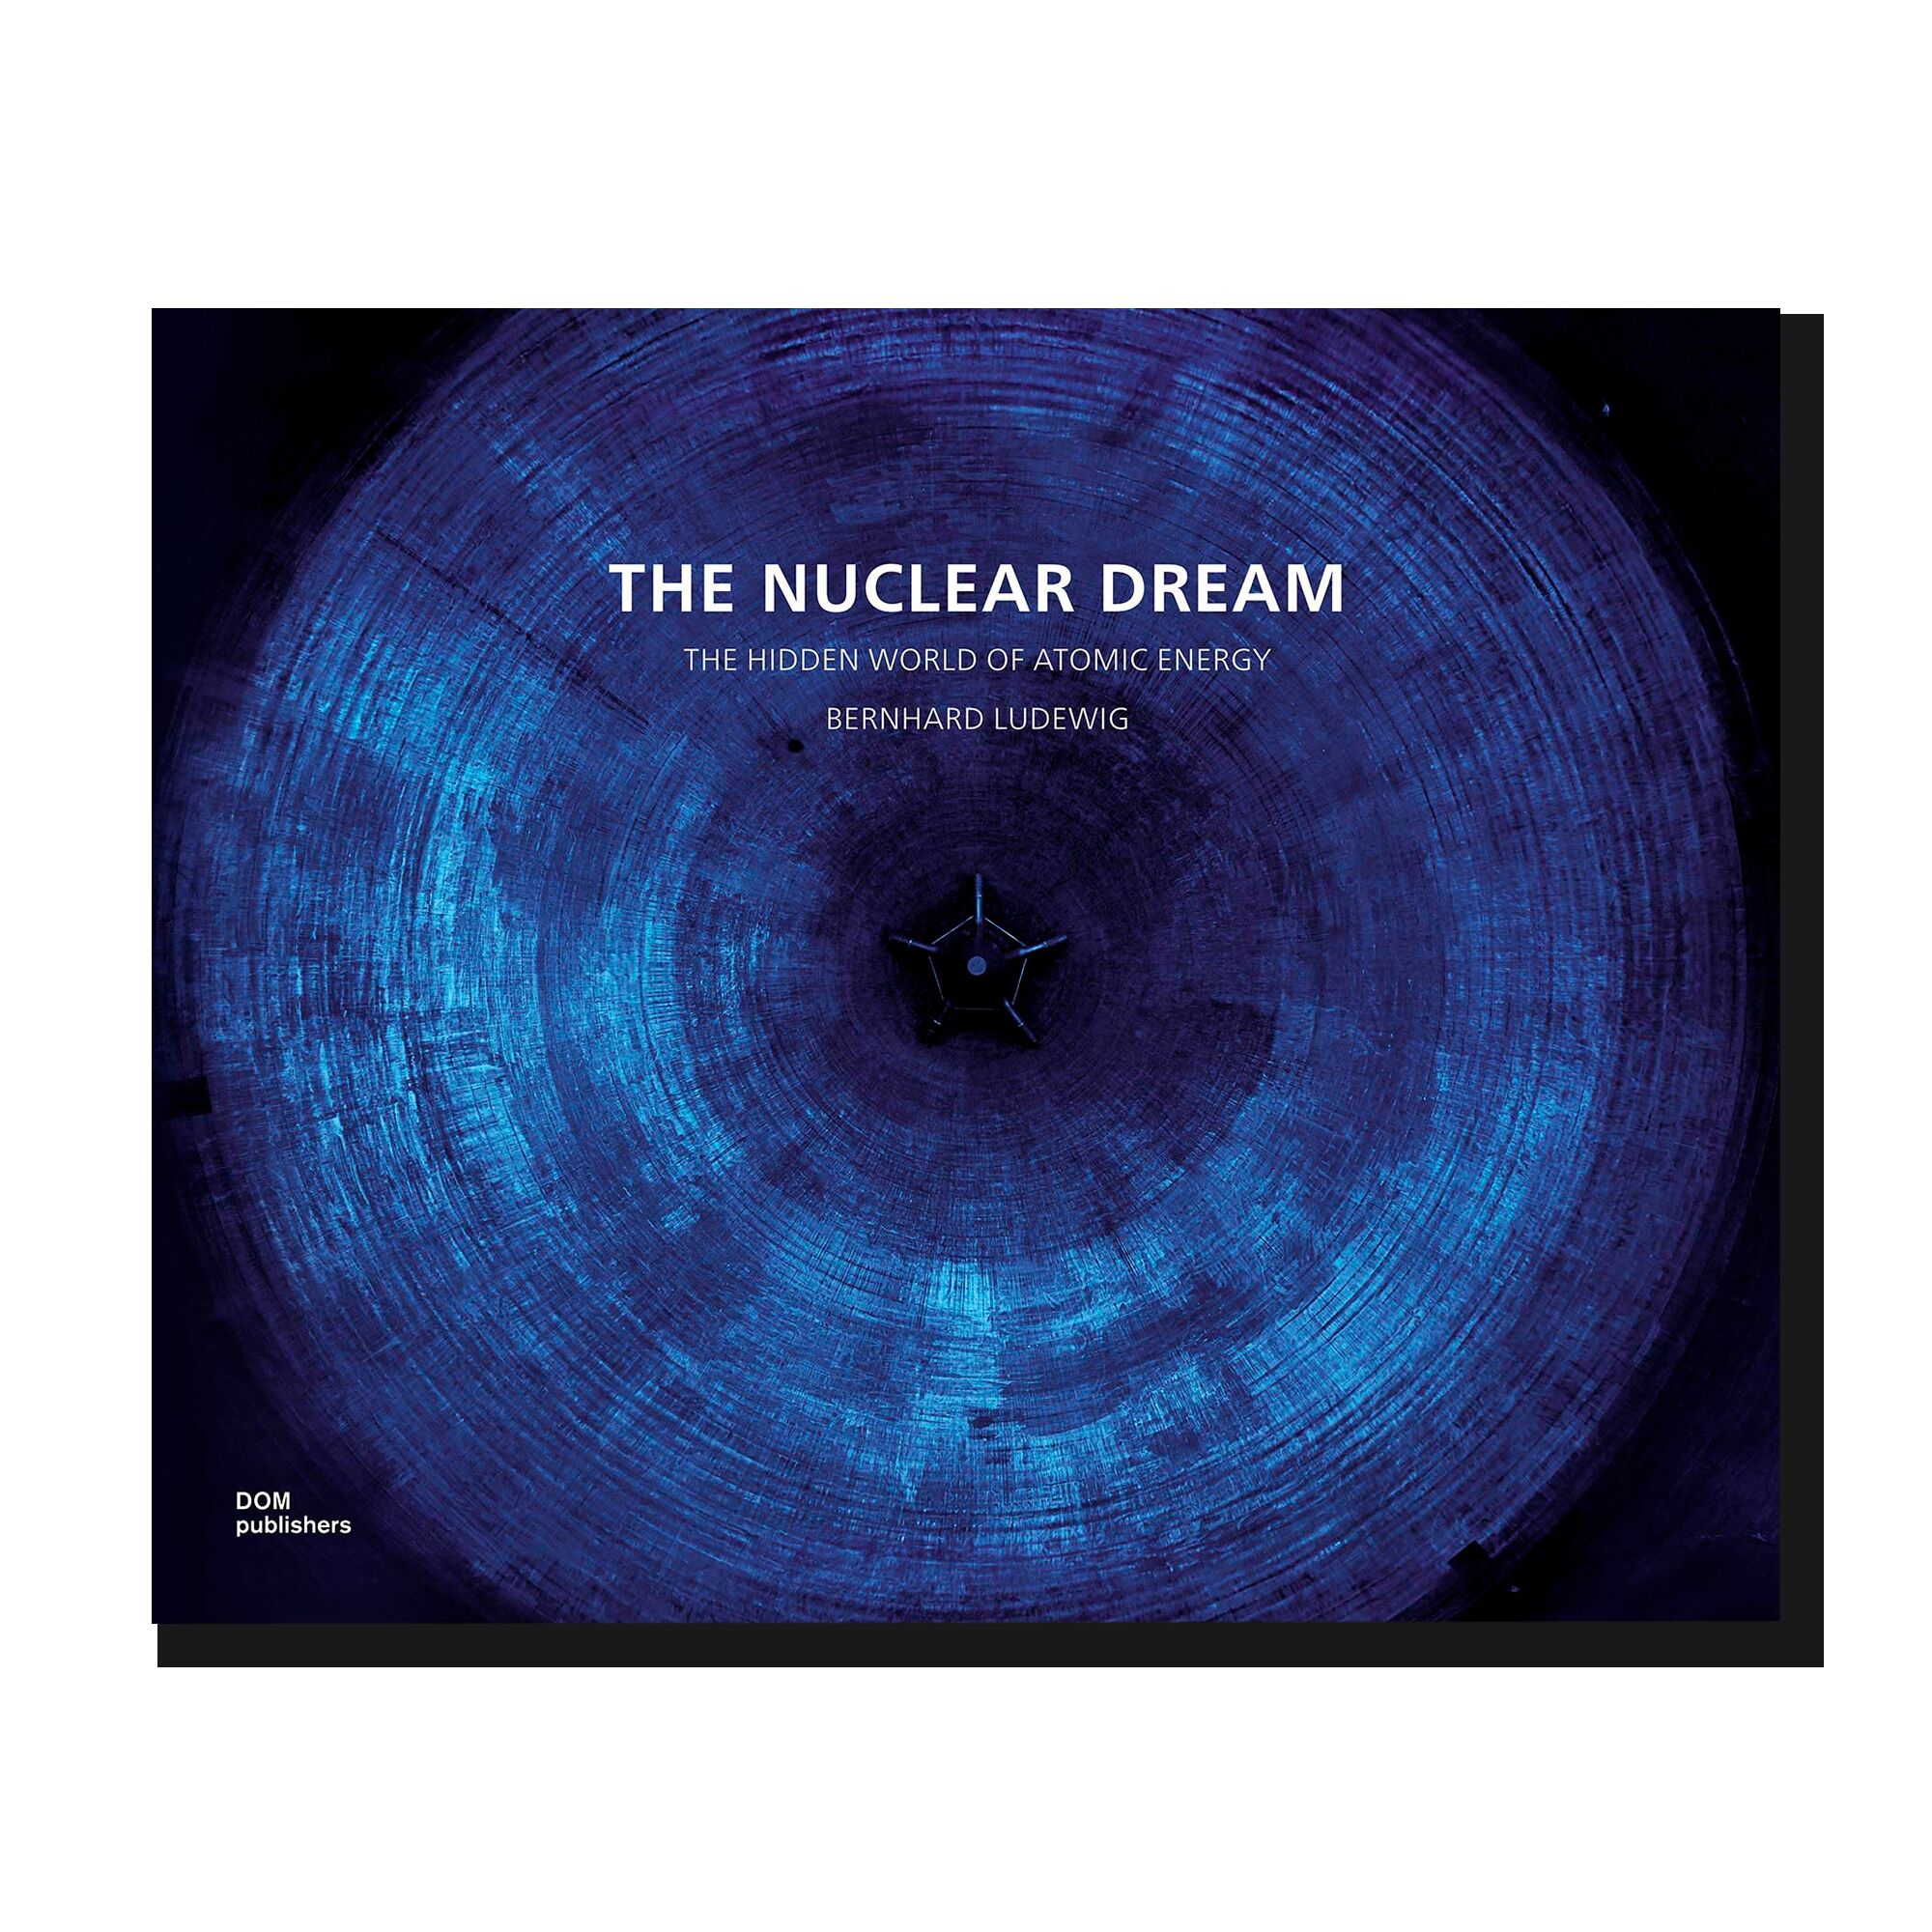 The Nuclear Dream. The Disappearing World of Atomic Energy